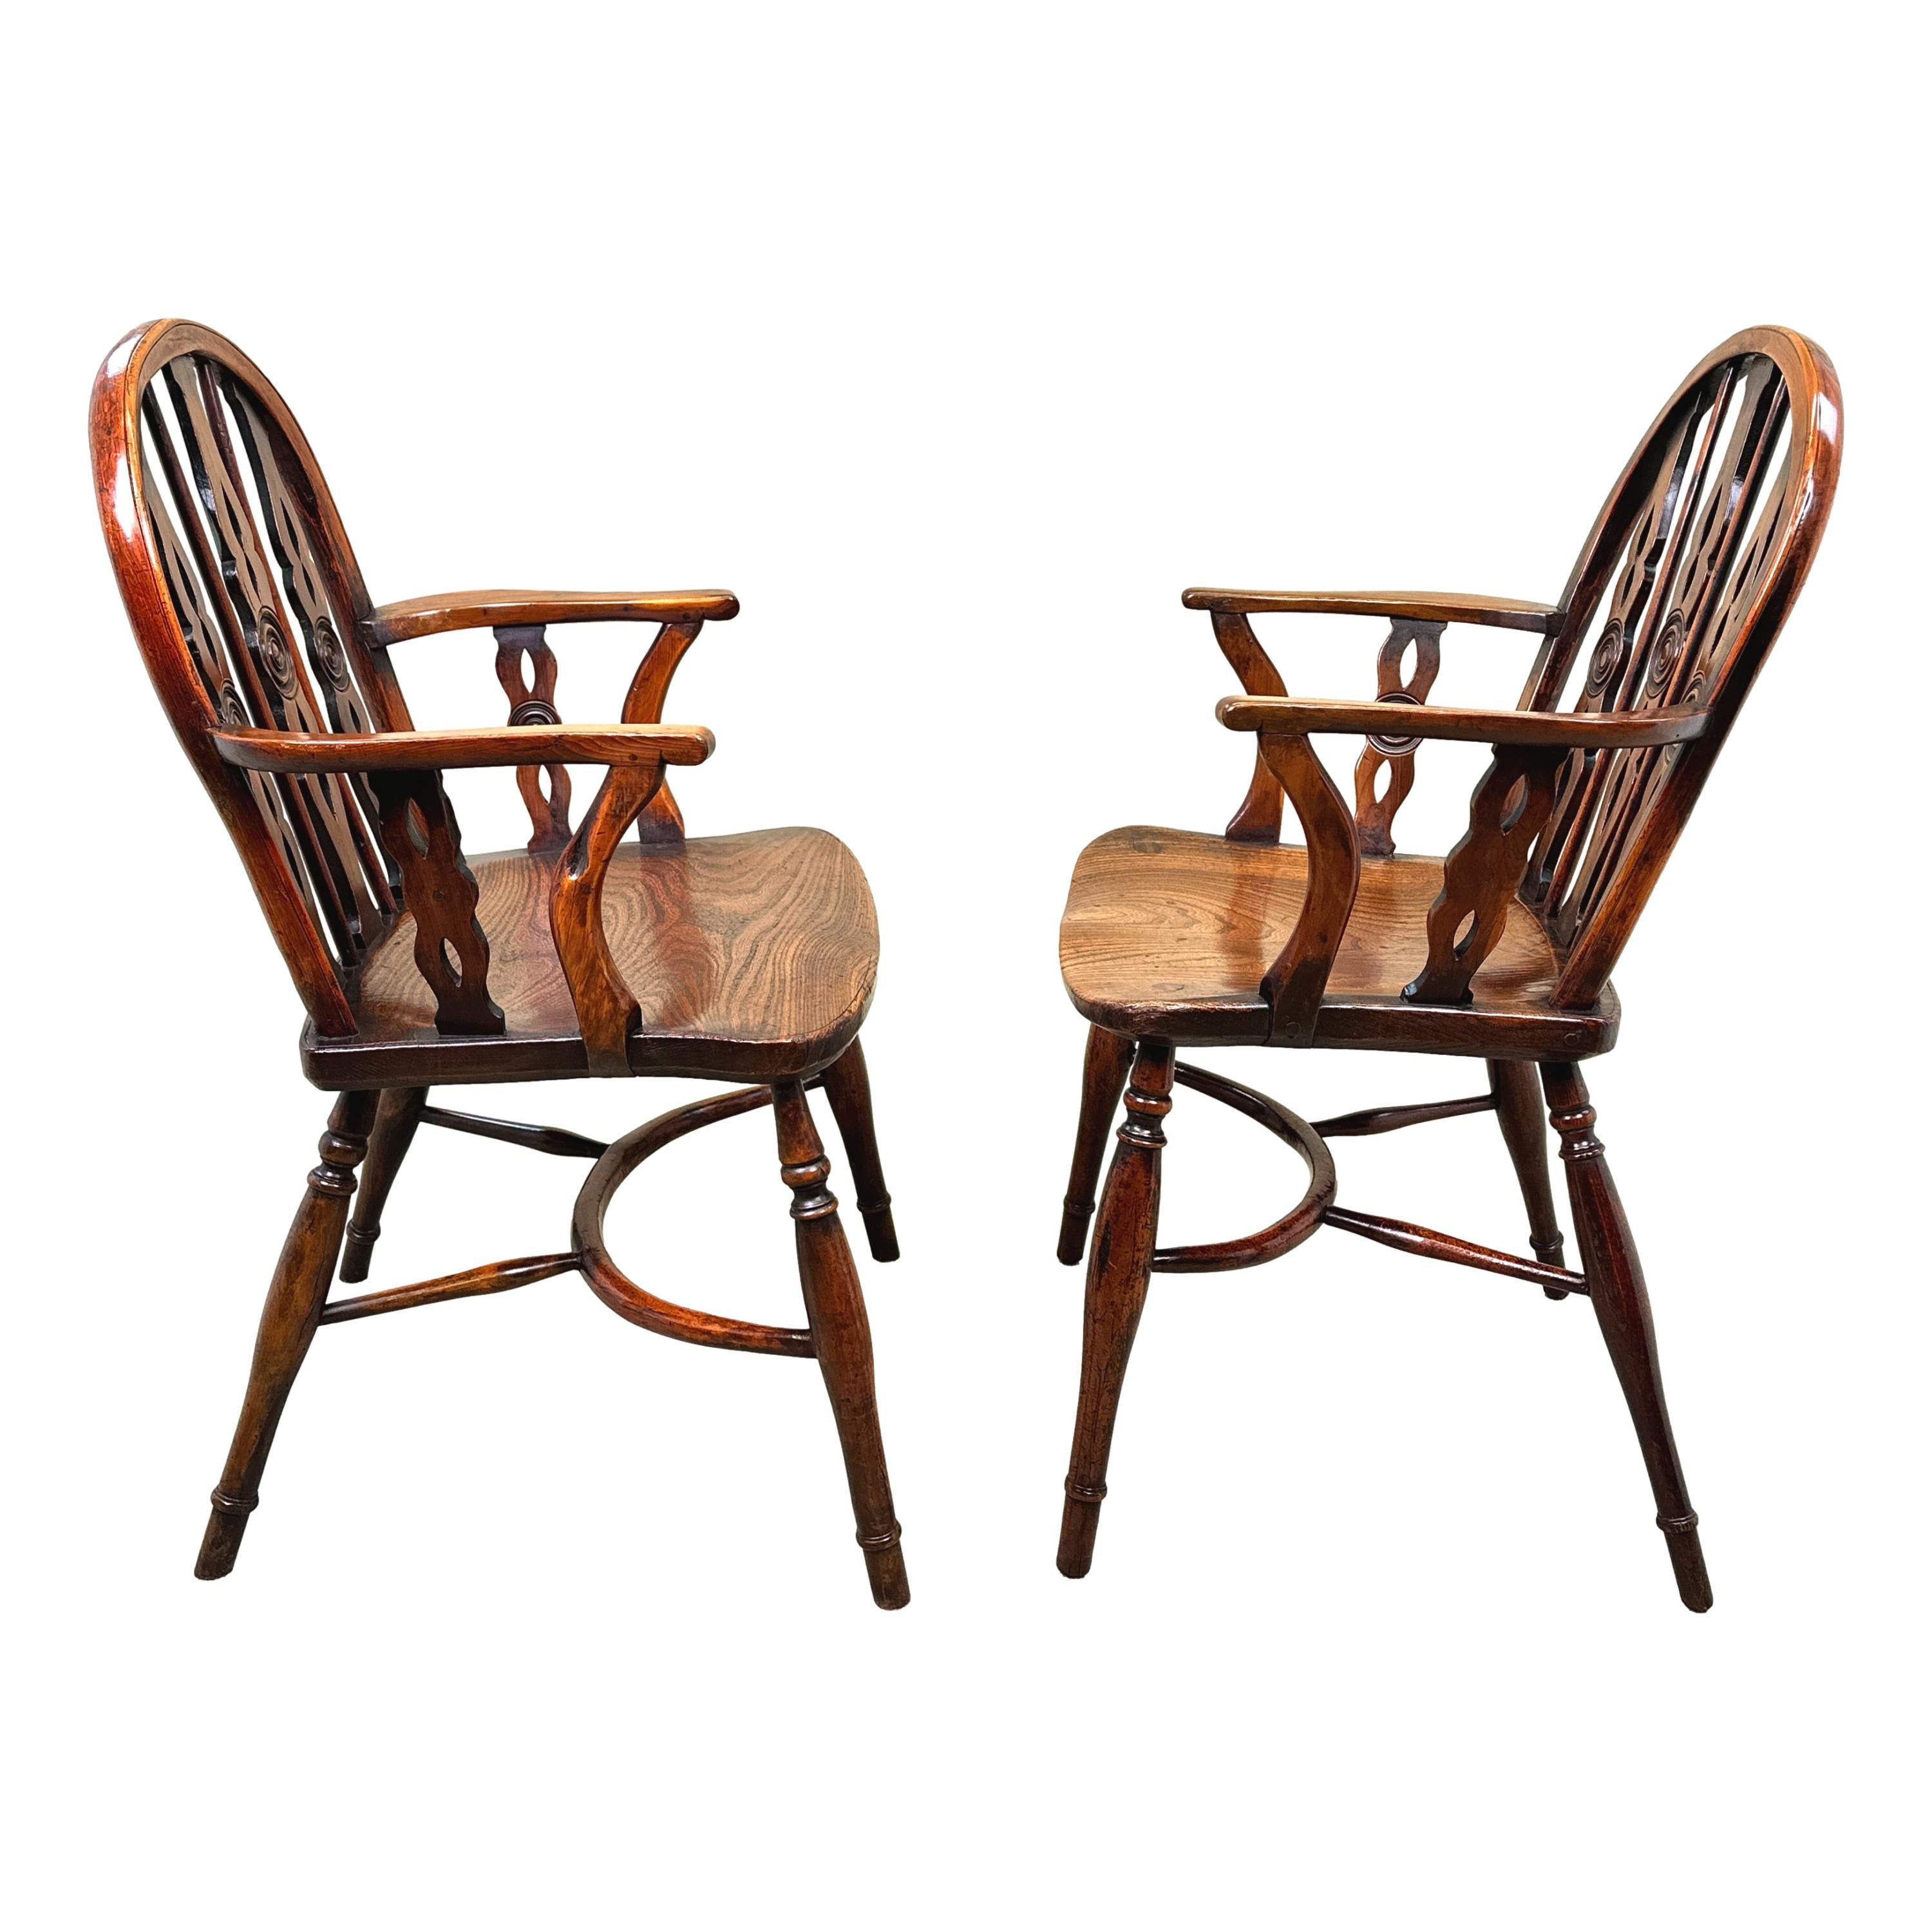 English Yew Wood Pair Of 19th Century Windsor Armchairs For Sale